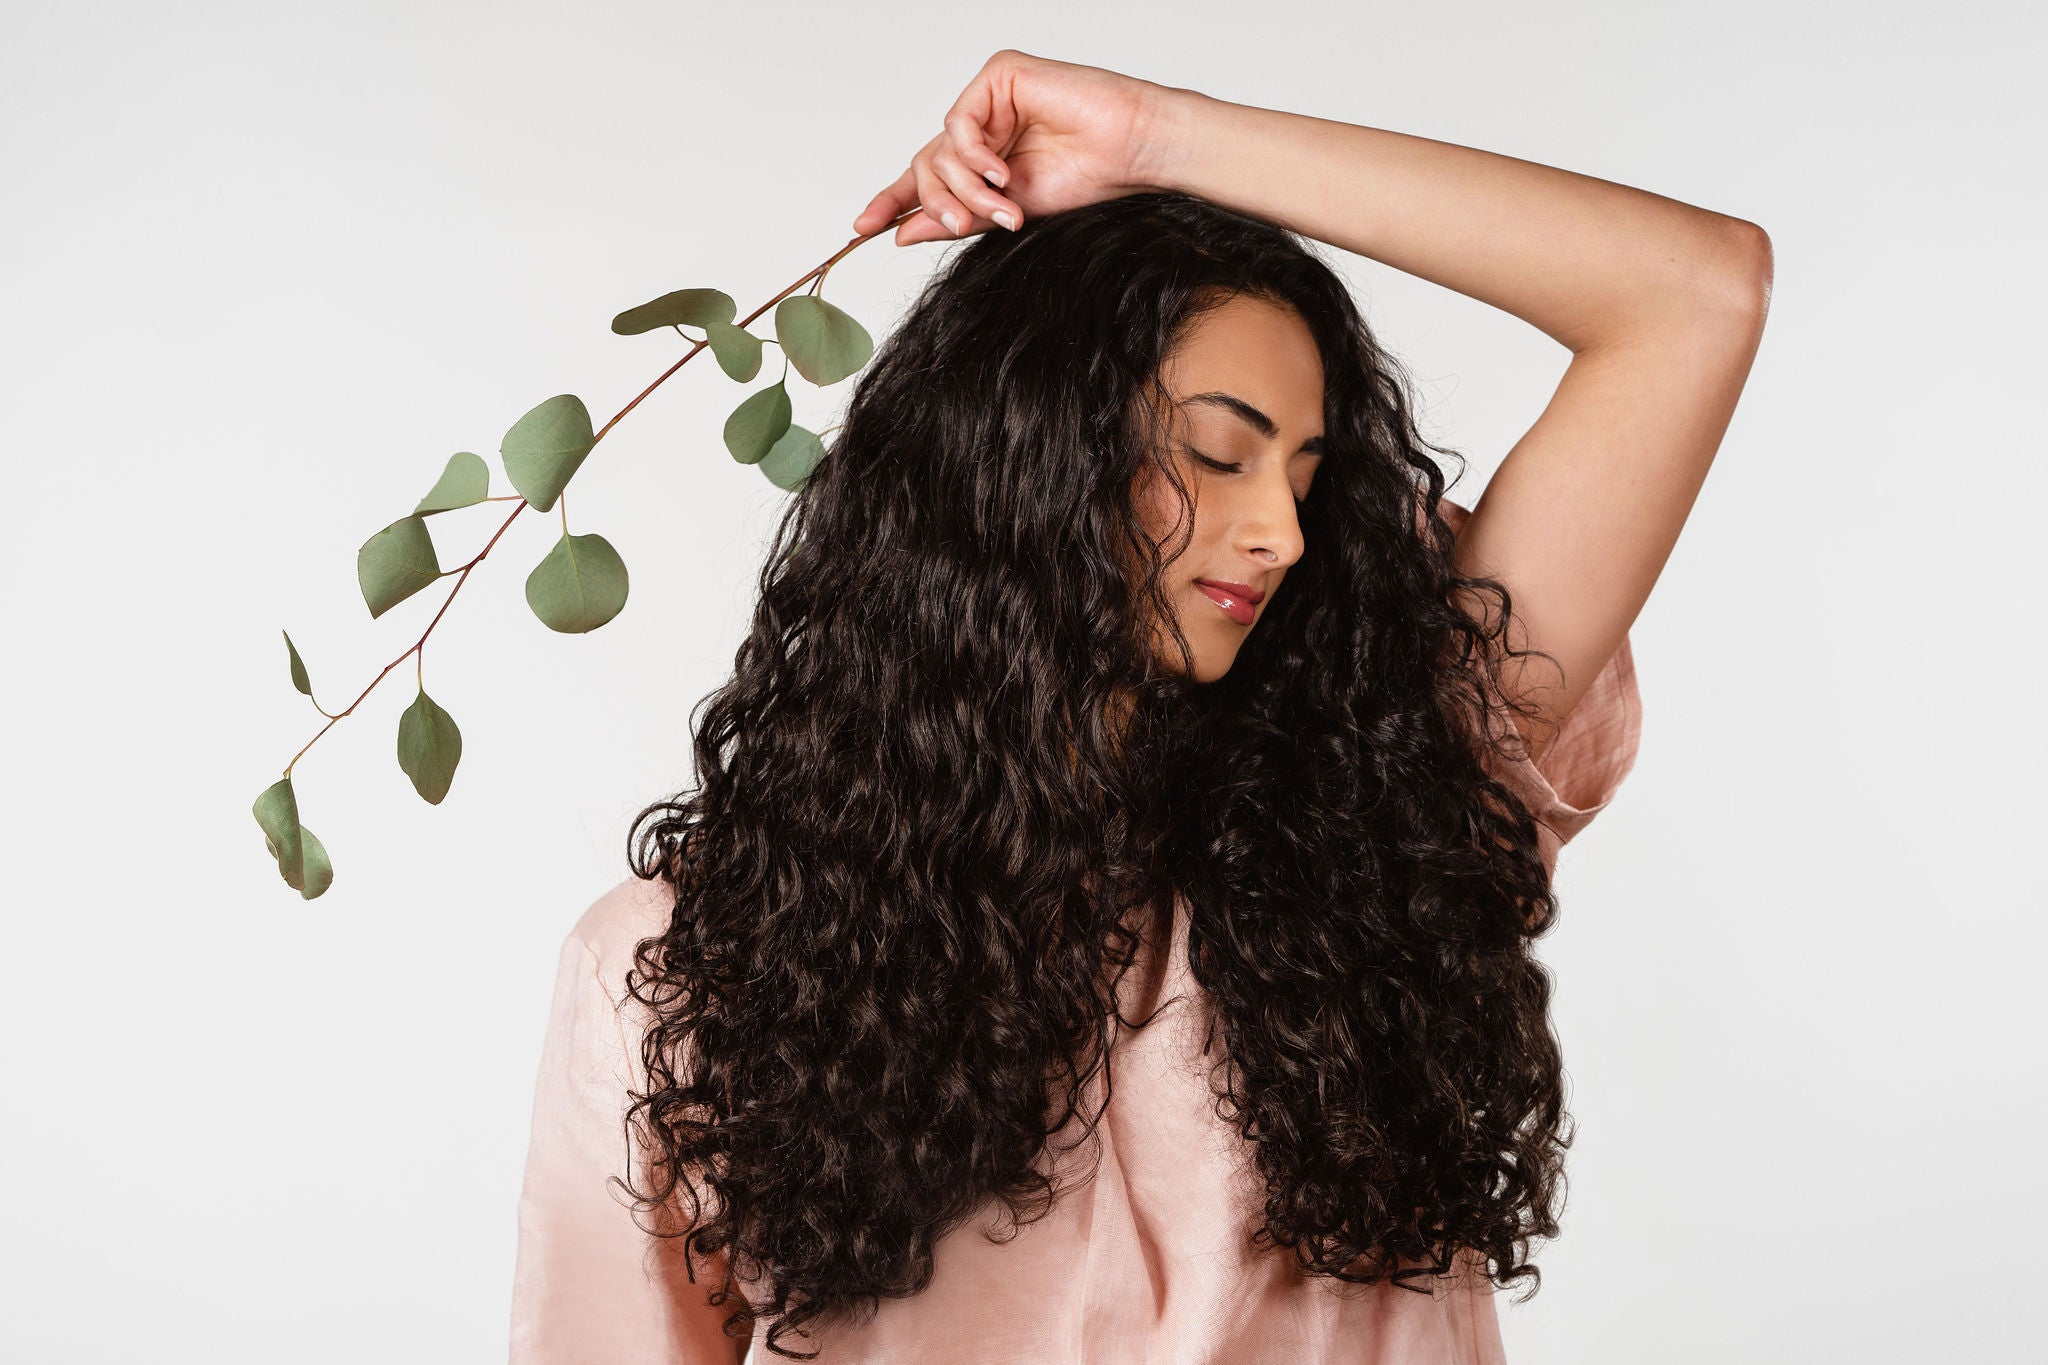 A woman with long curly hair and a piece of eucalyptus